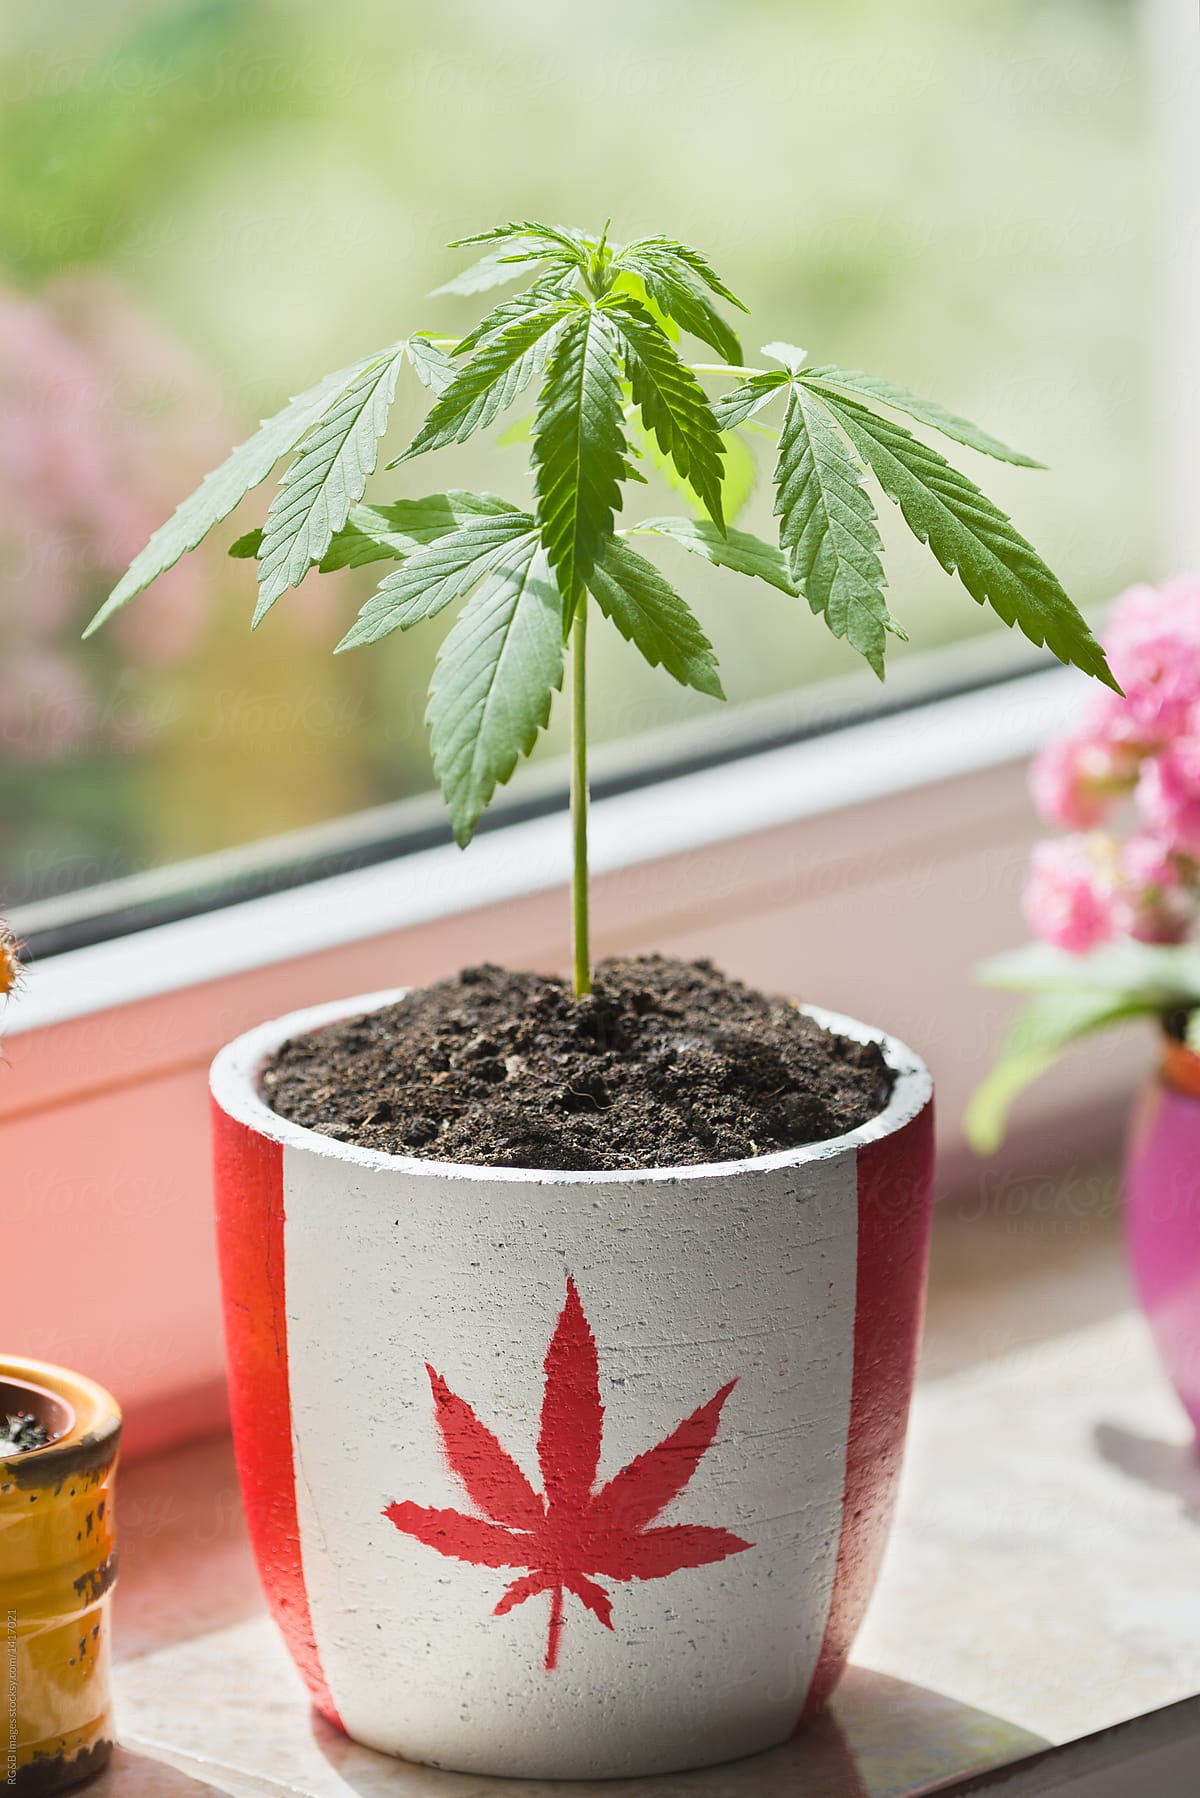 Marijuana growing in pot with Canadian flag to symbolize legalization